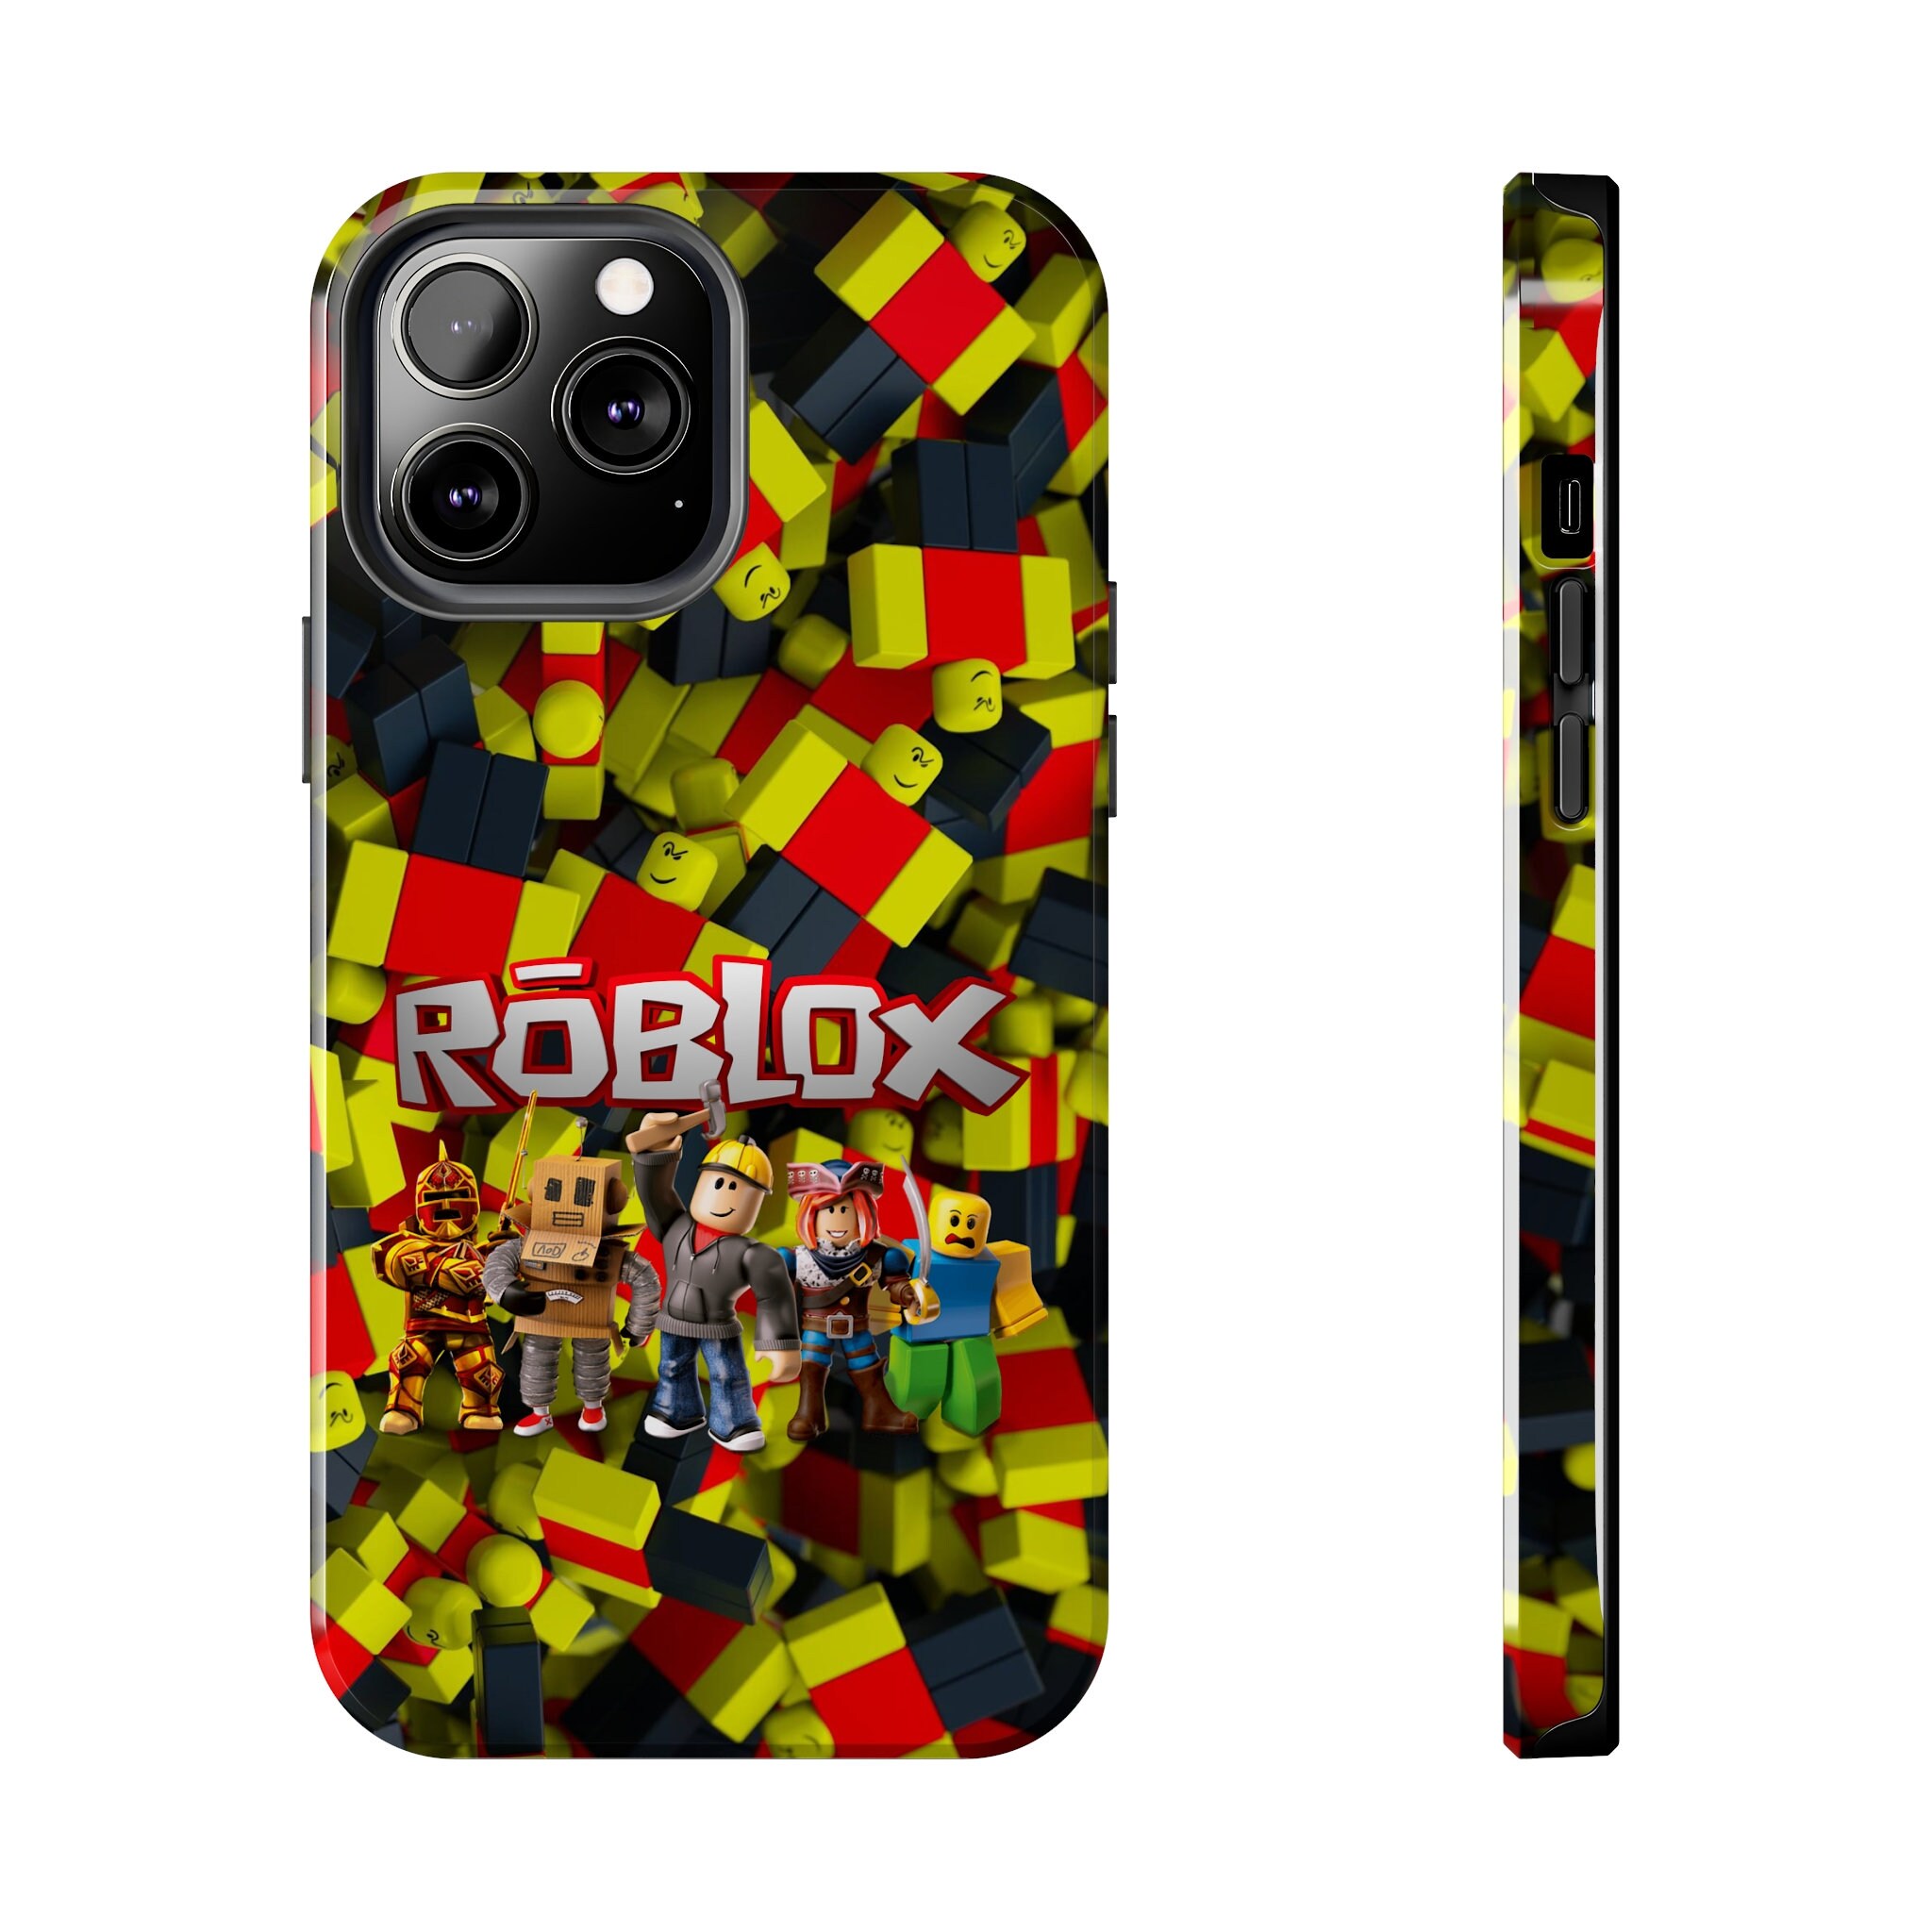 Gfx Roblox Phone Cases for Sale